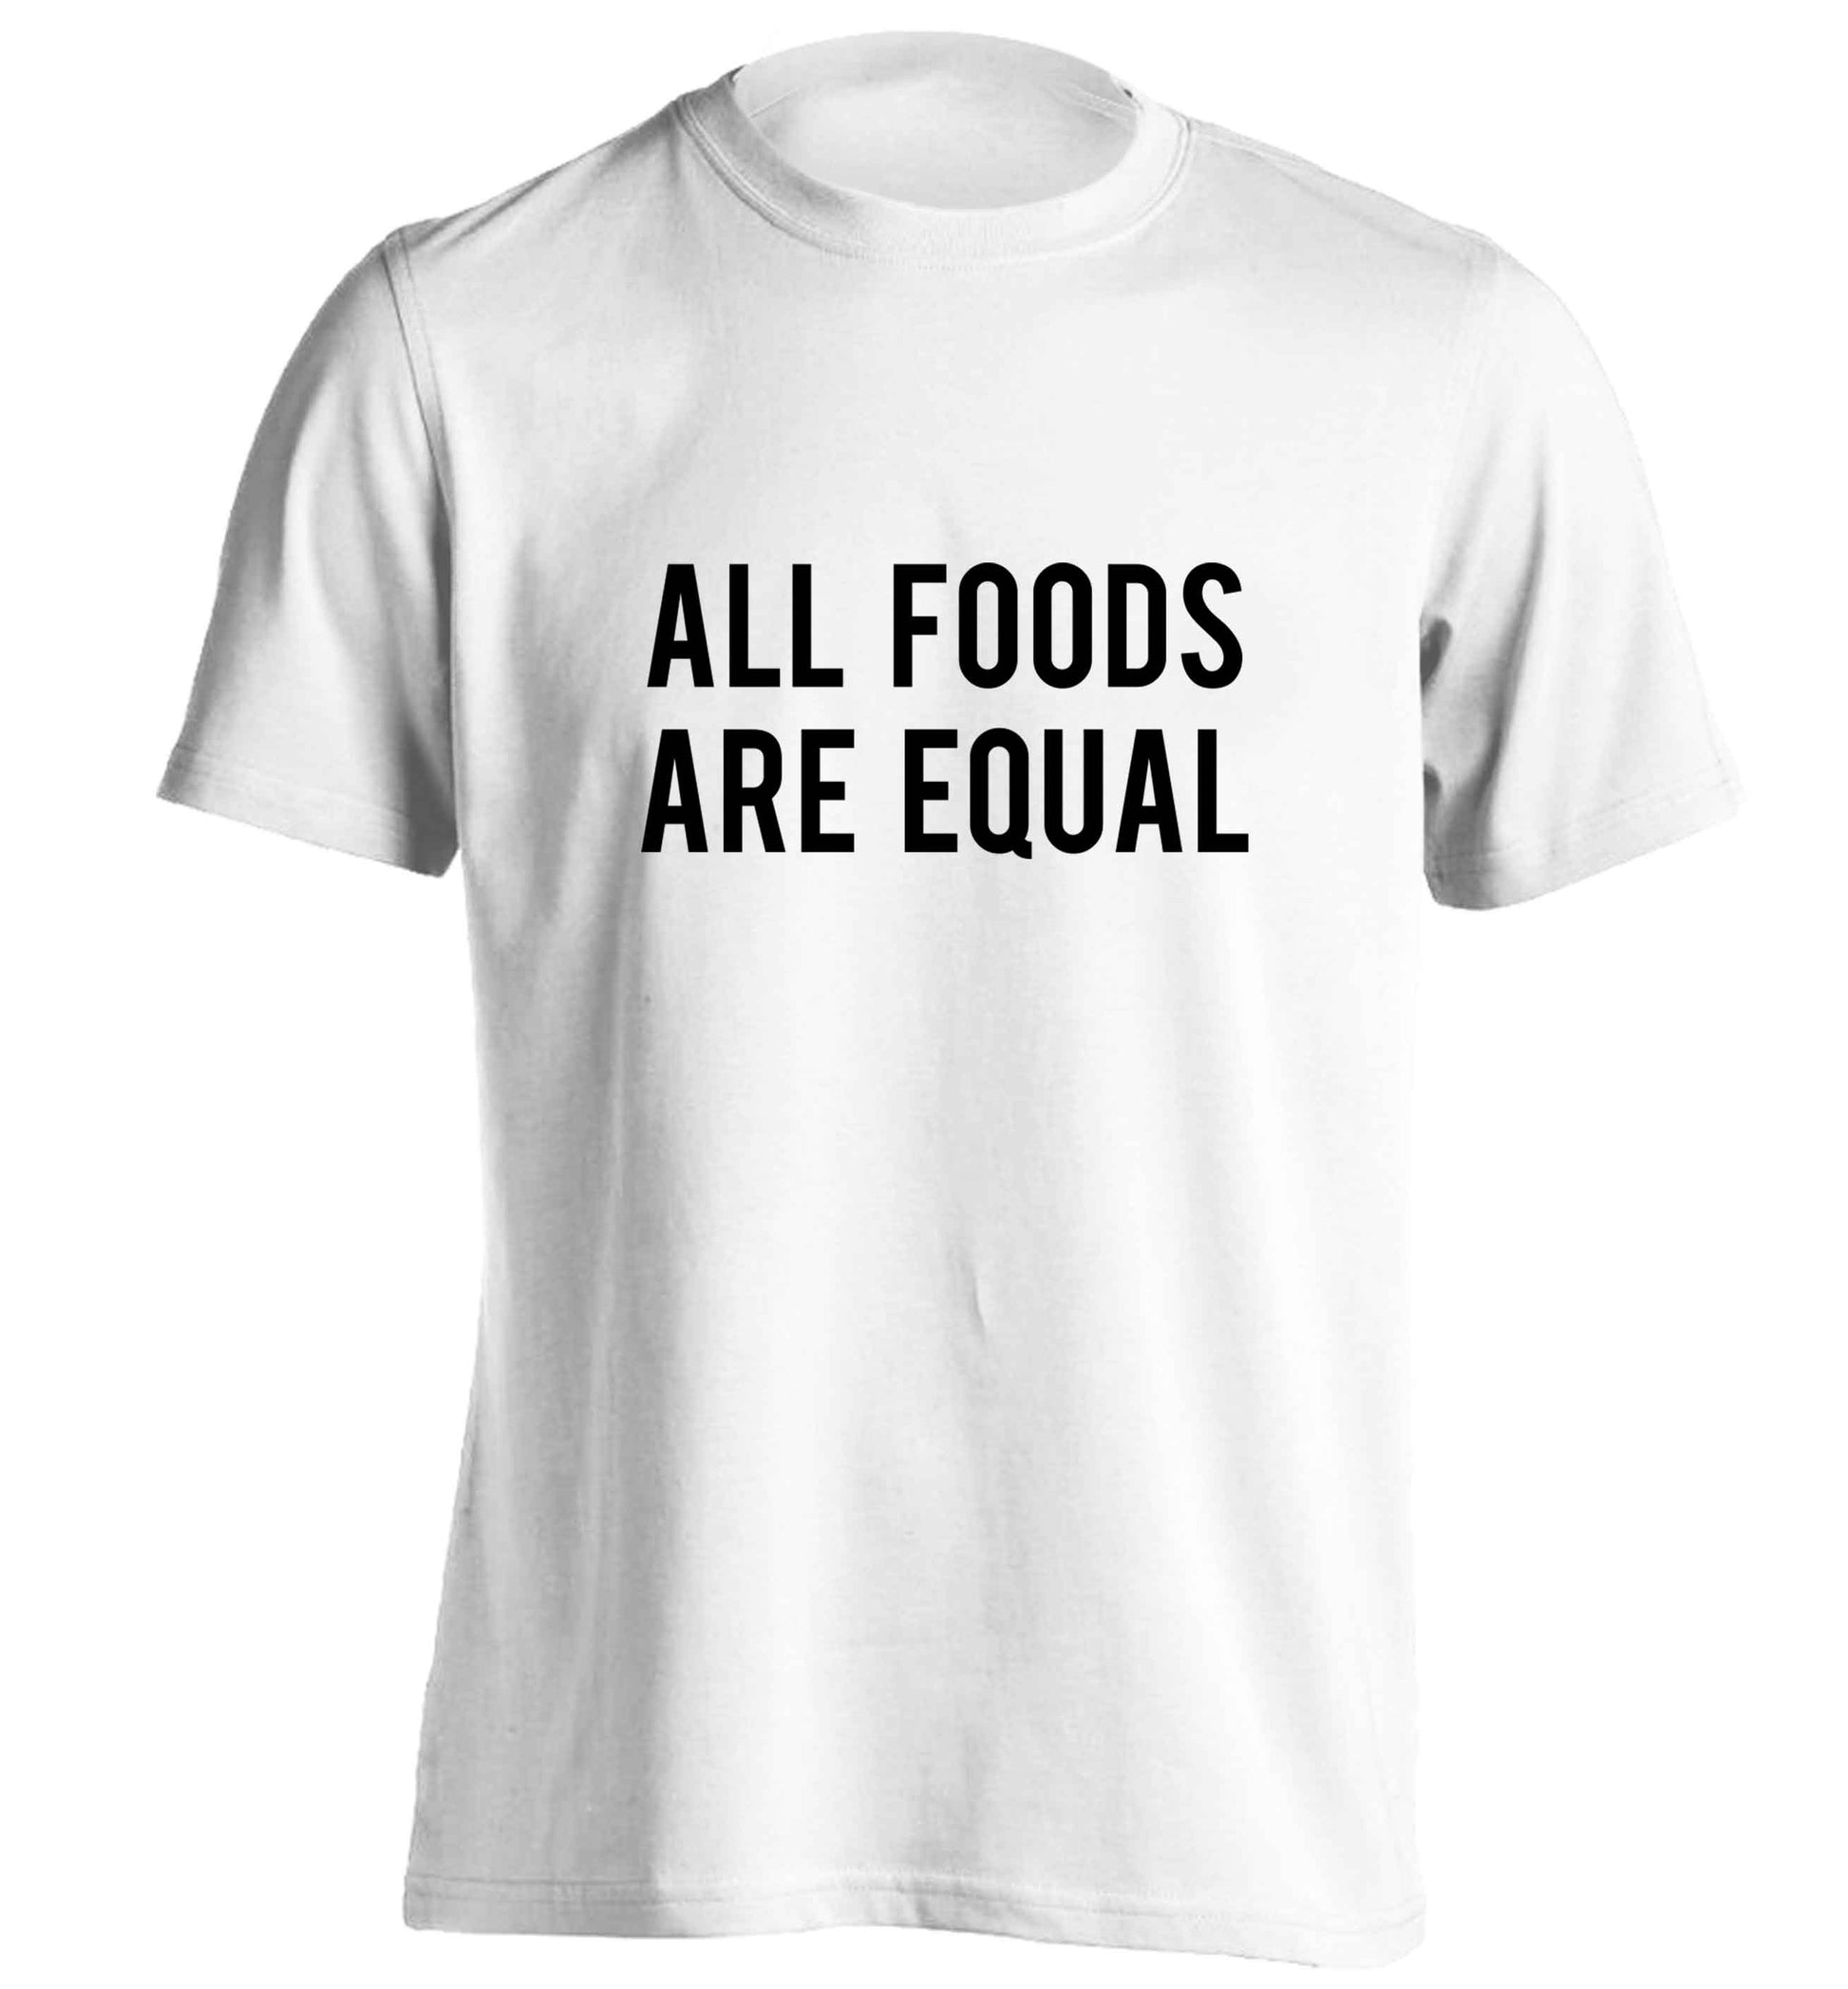 All foods are equal adults unisex white Tshirt 2XL